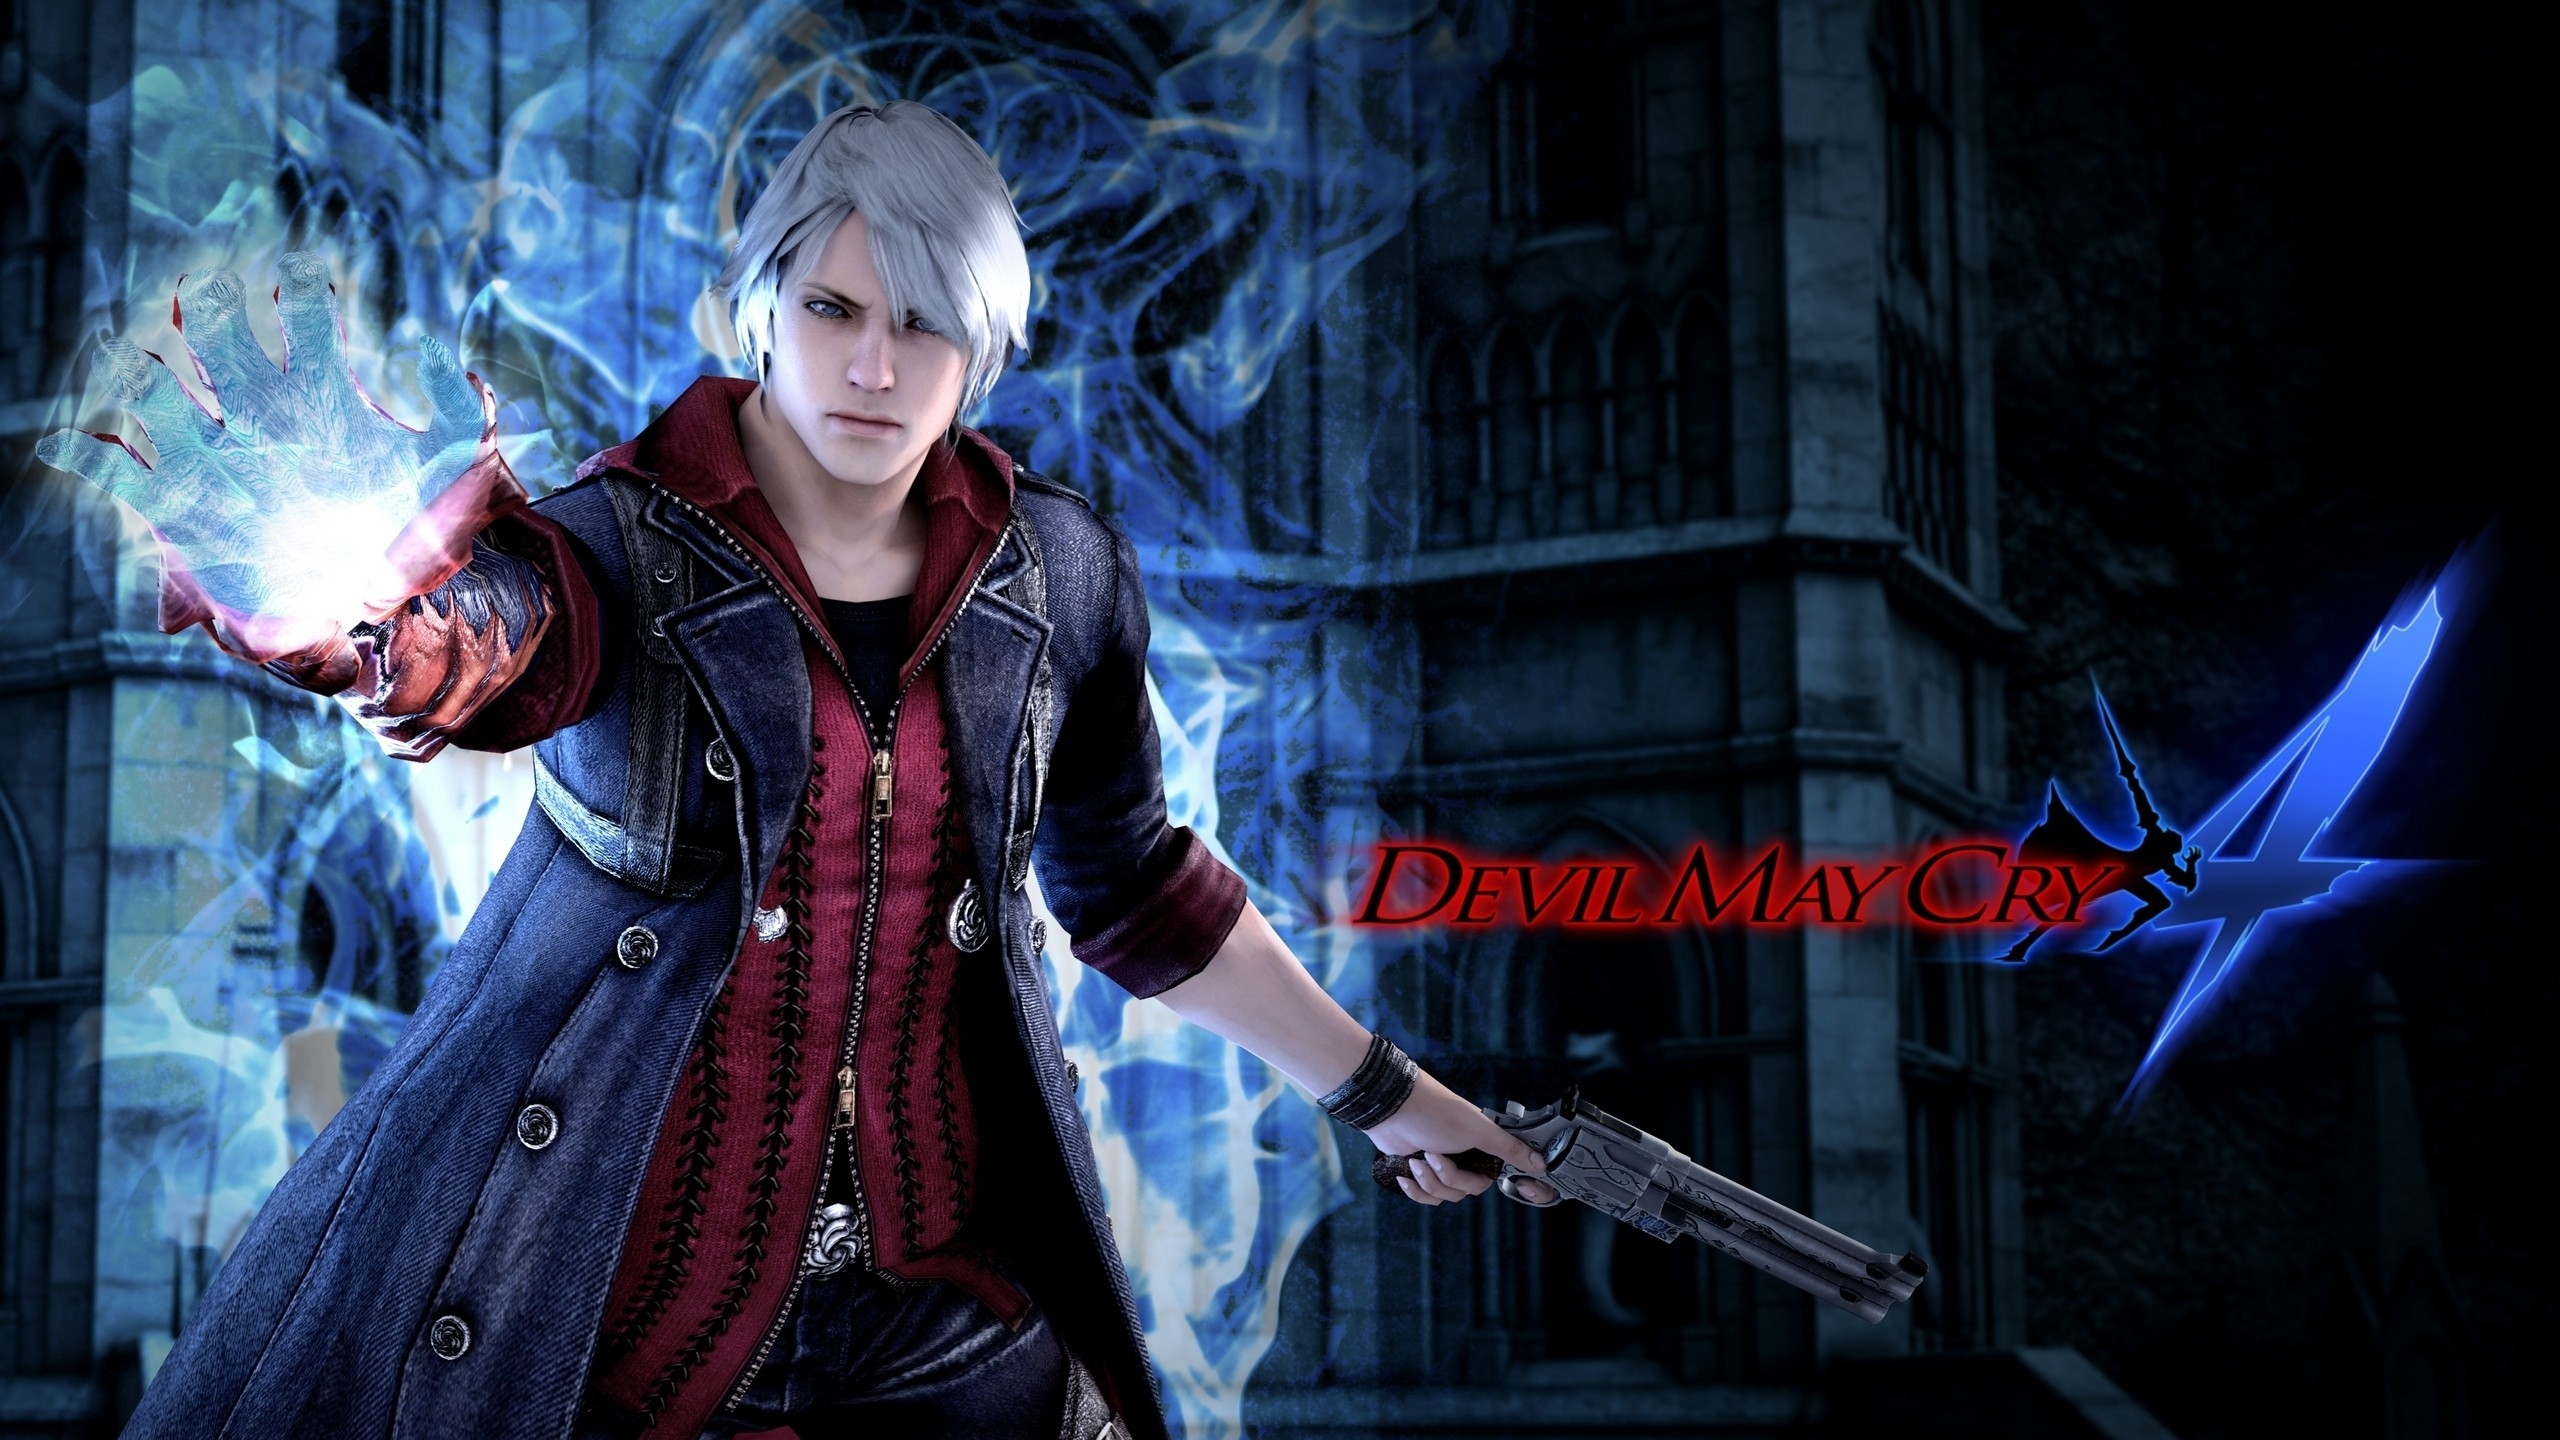 Devil May Cry 4 Poster for 2560x1440 HDTV resolution